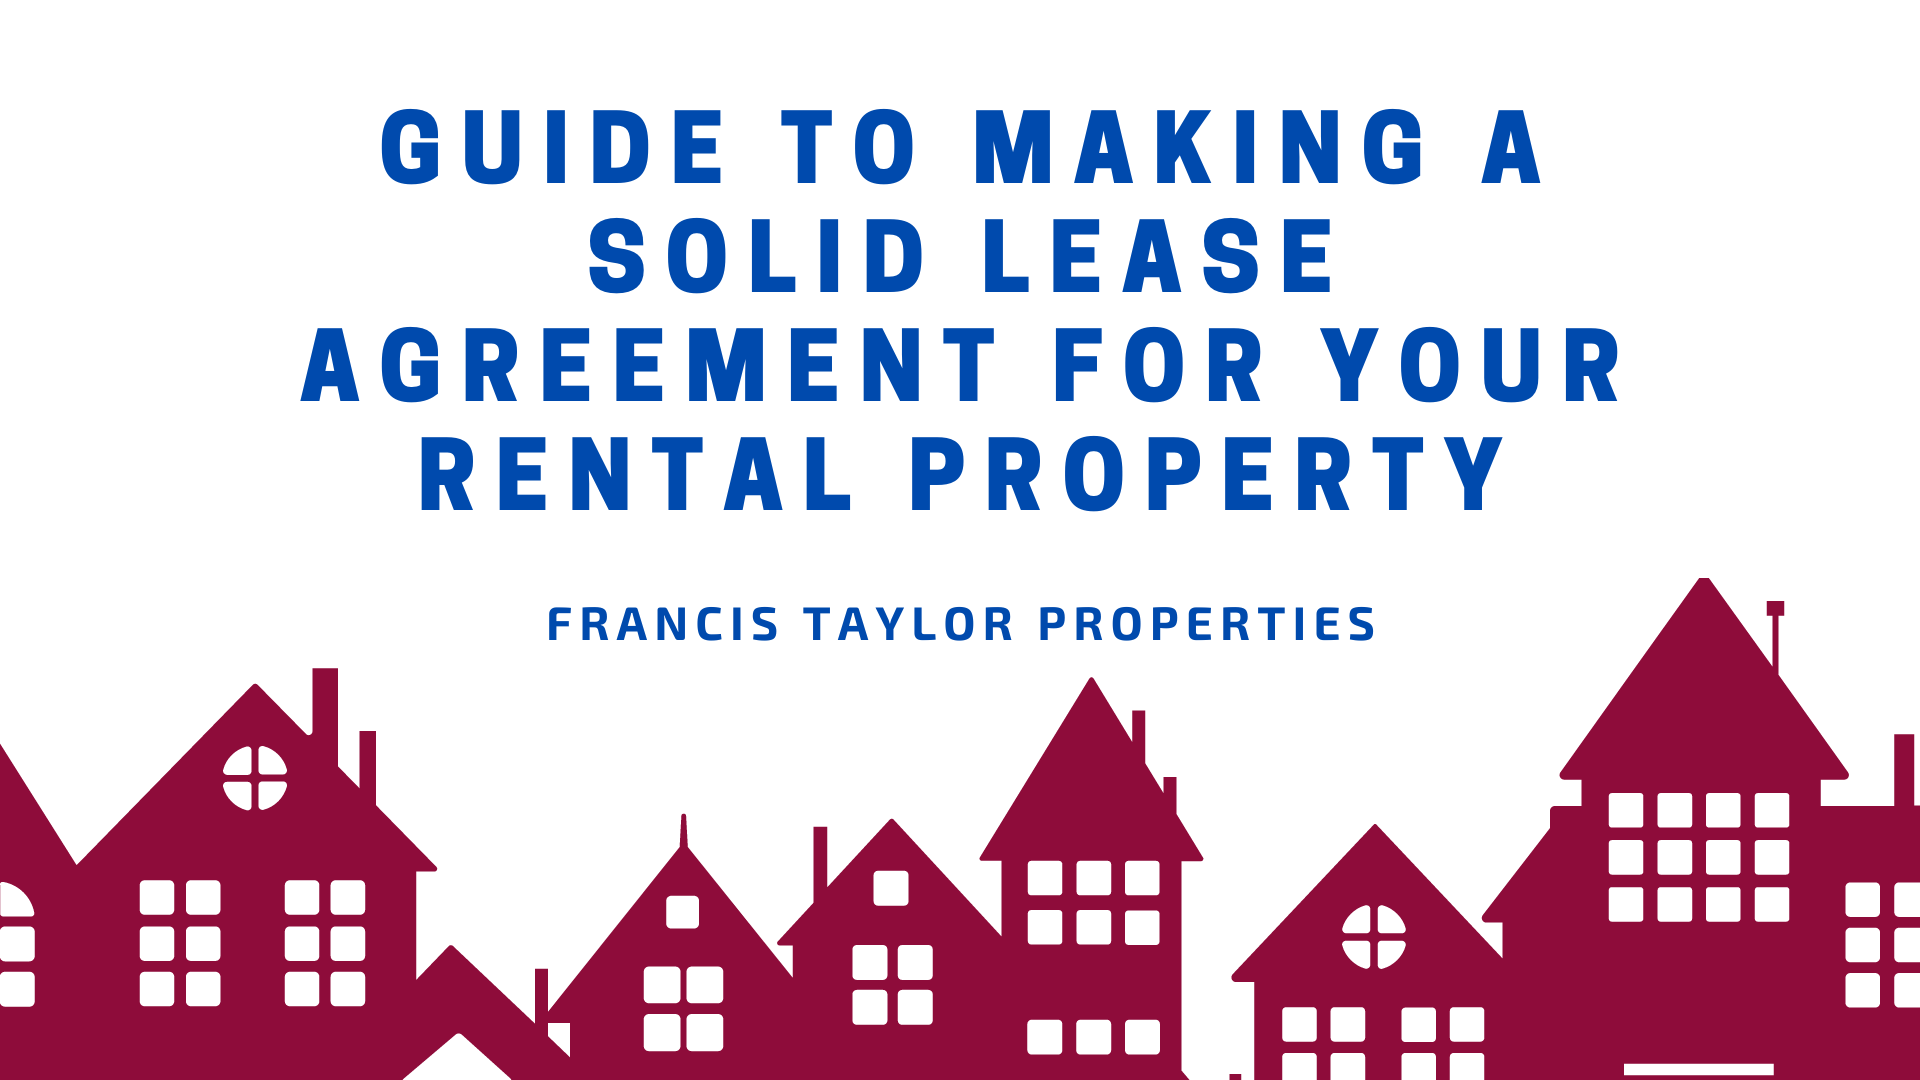 Guide to Making a Solid Lease Agreement For Your Rental Property